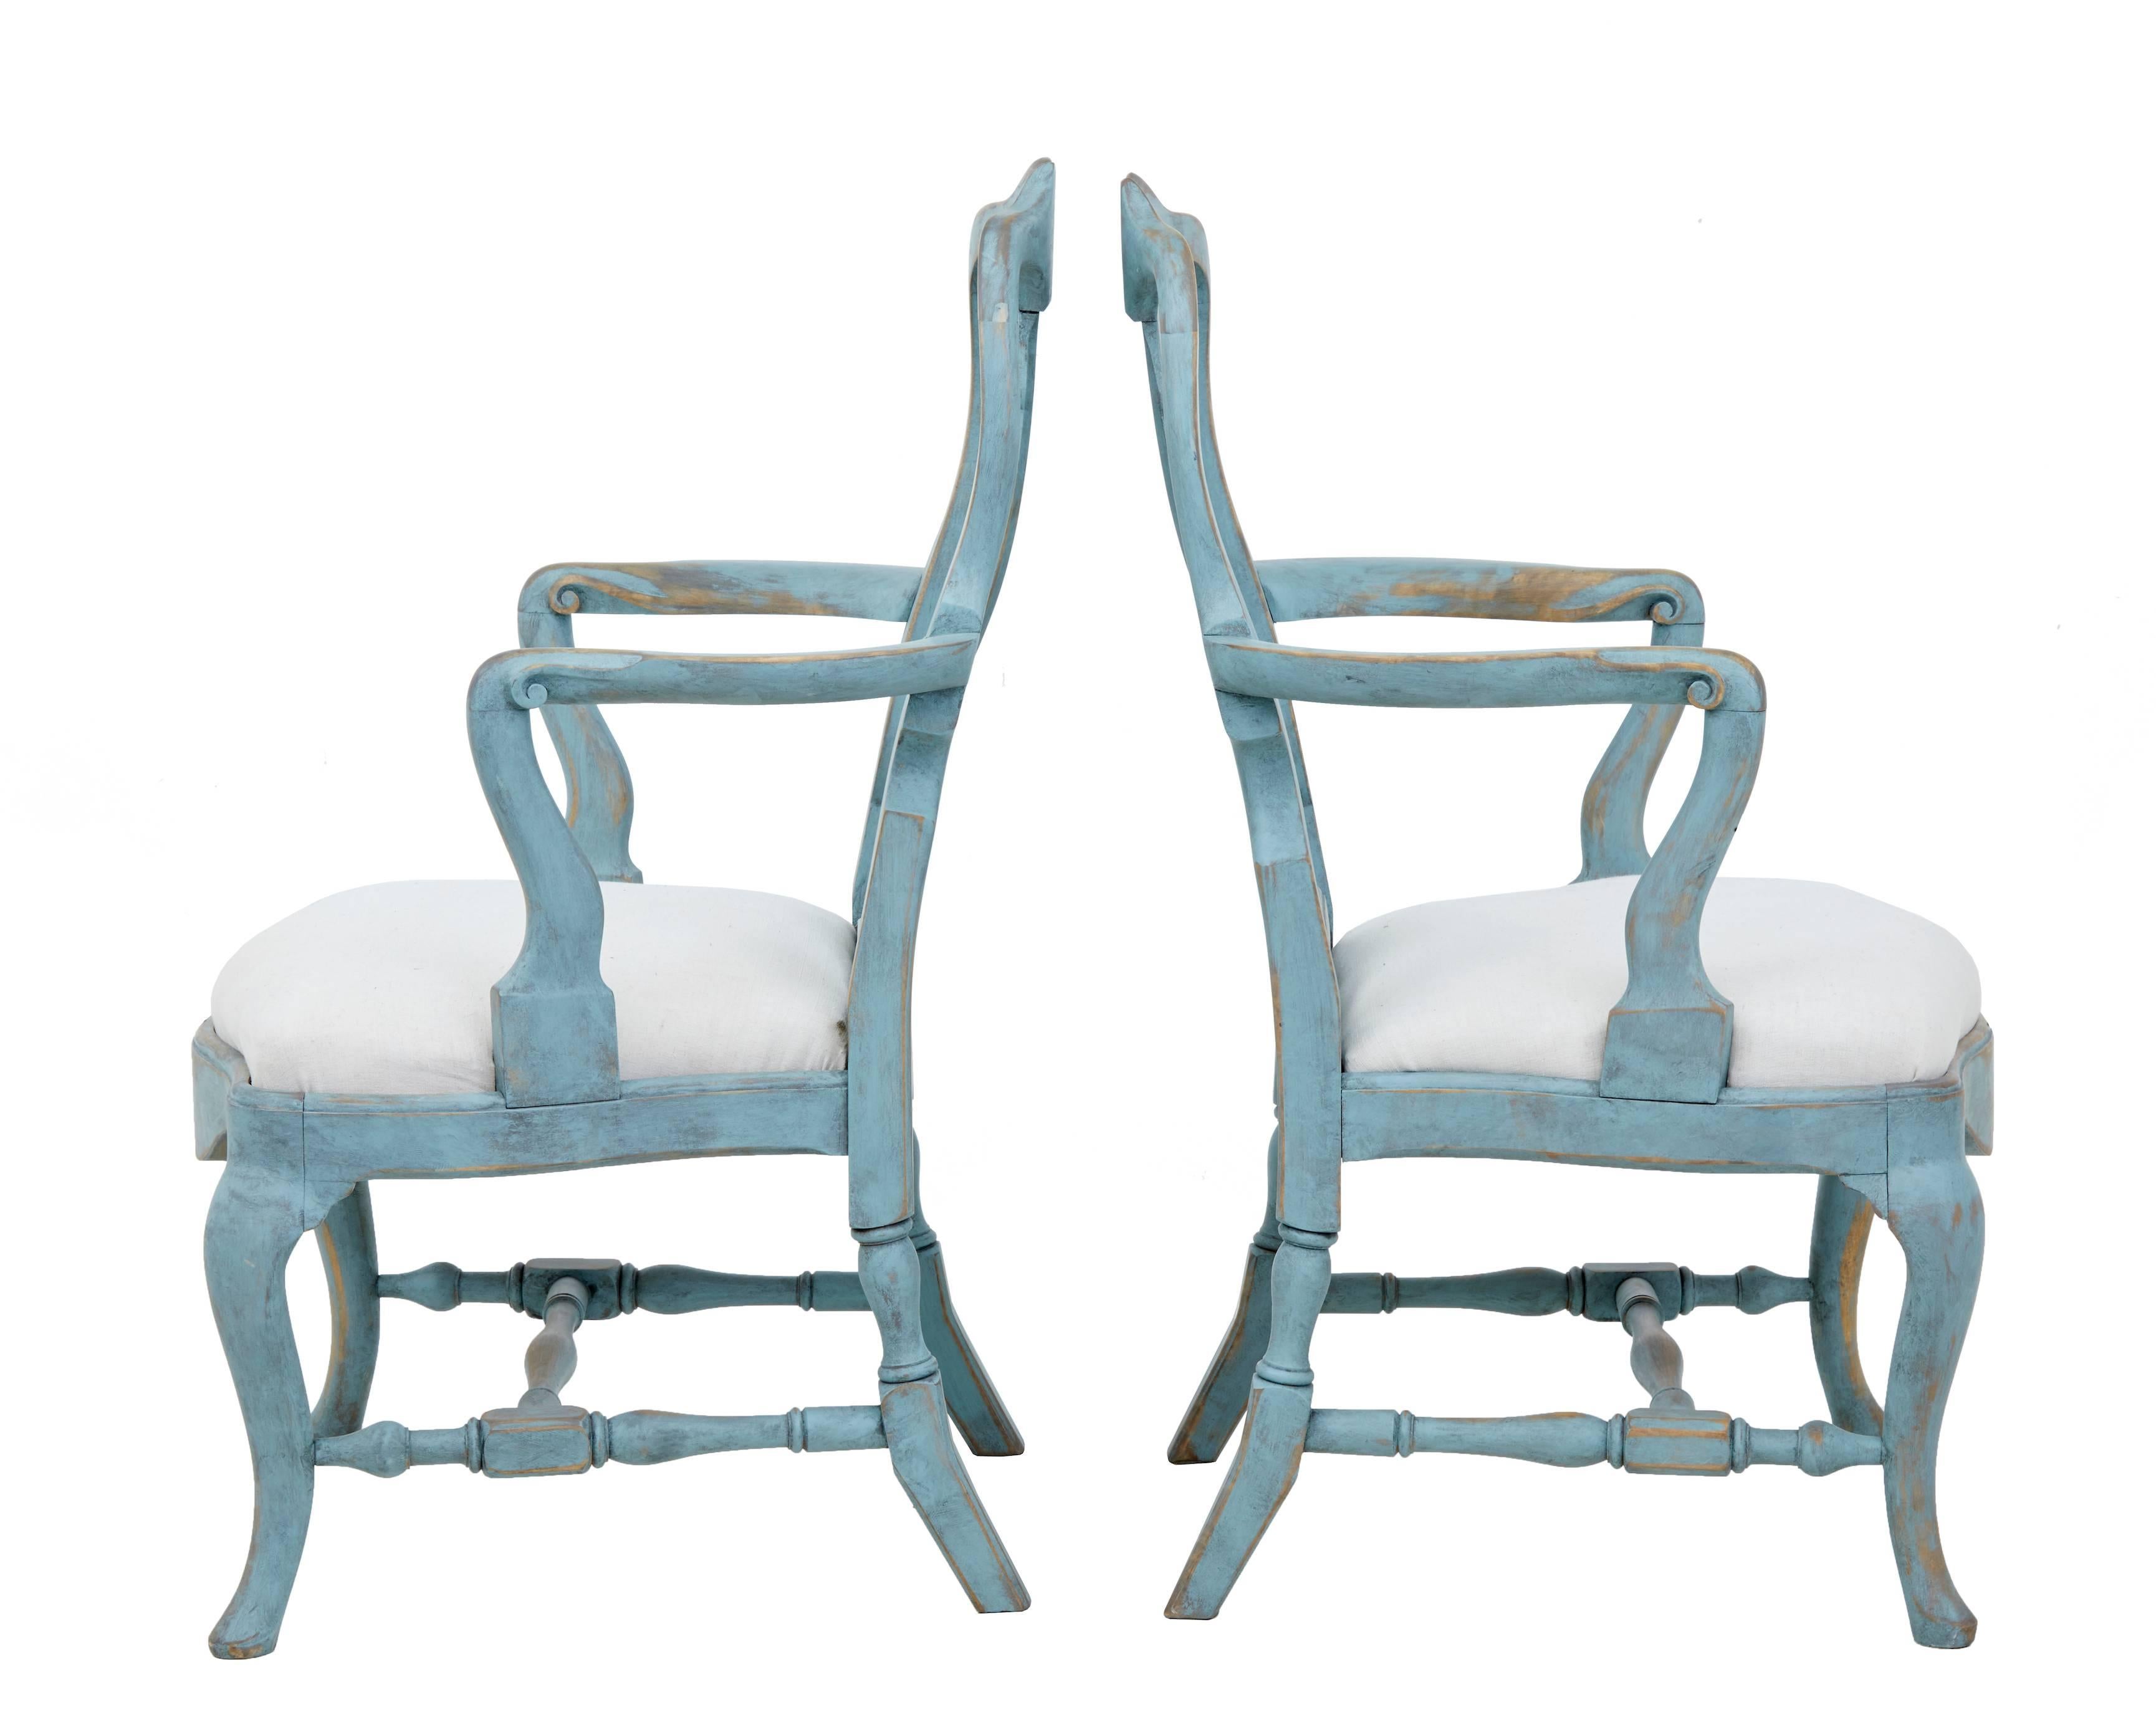 Painted pair of Swedish Gustavian influenced armchairs, circa 1880.
Carved shaped scrolling arms.
Leading down to shaped front with drop in seats.
Later distressed paint.

Measures: Height 38 1/4"
Width 25 1/2"
Depth 23"
Seat